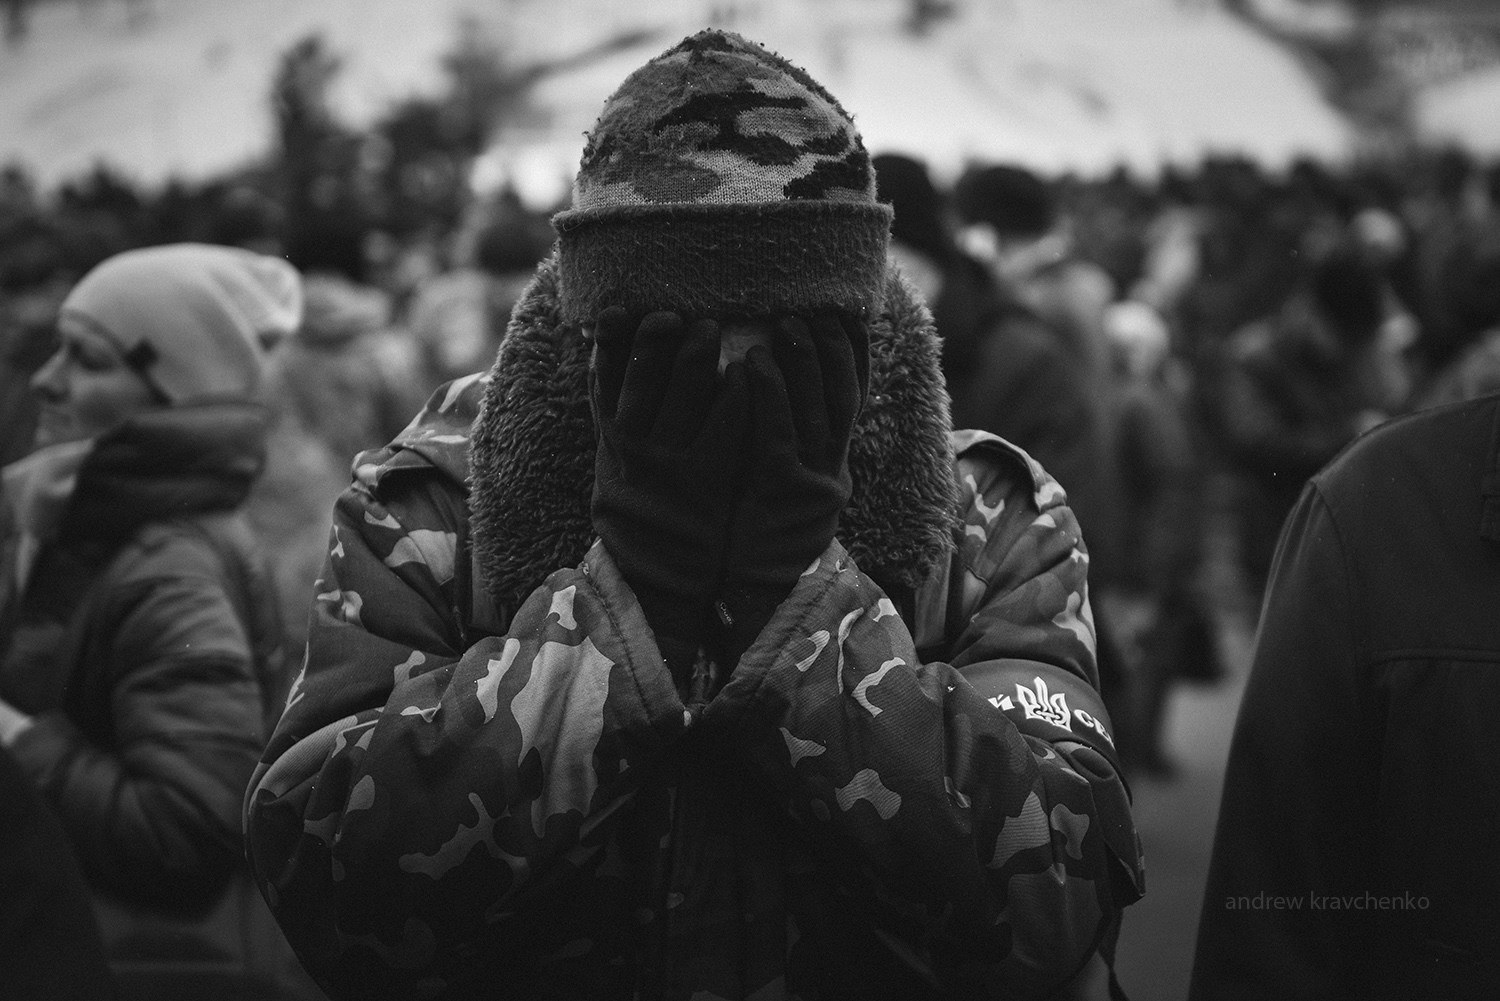 Taken by Andrew Kravchenko, these stark black-and-white photos of the memorial service on February 1 in Kyiv for Ukrainian soldiers killed in and around Avdiyivka on January 29-30 convey the grief of all Ukrainians and their respect and gratitude before these Heroes, who made the ultimate sacrifice defending Ukraine from the Russian military aggression.